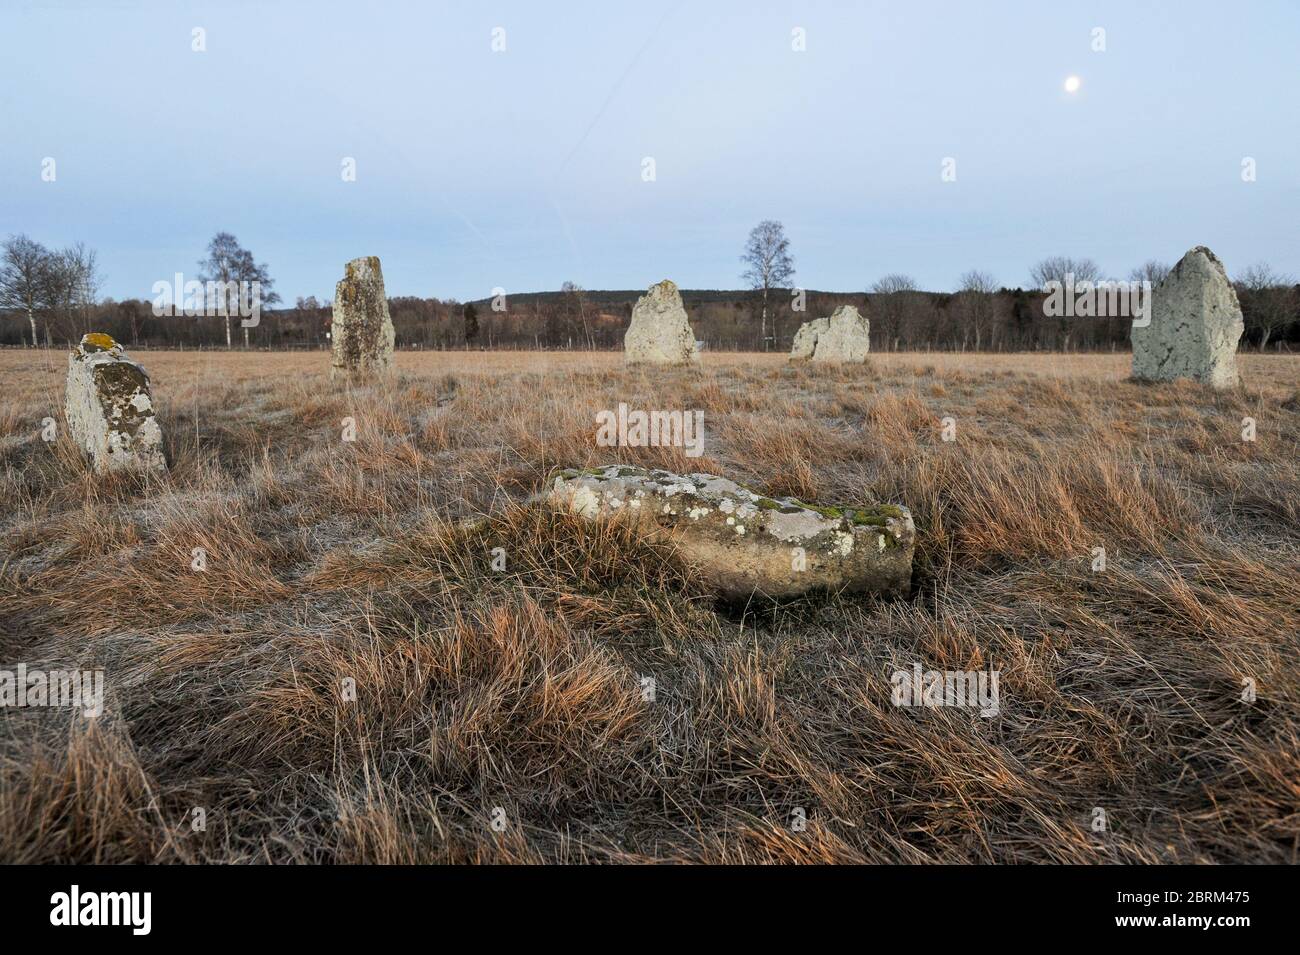 Iron Age stone circle in Ekornavallen ancient burial ground from Neolithic, Bronze Age and Iron Age (3300 BC to 500 BC) in Broddetorp, Västra Götaland Stock Photo